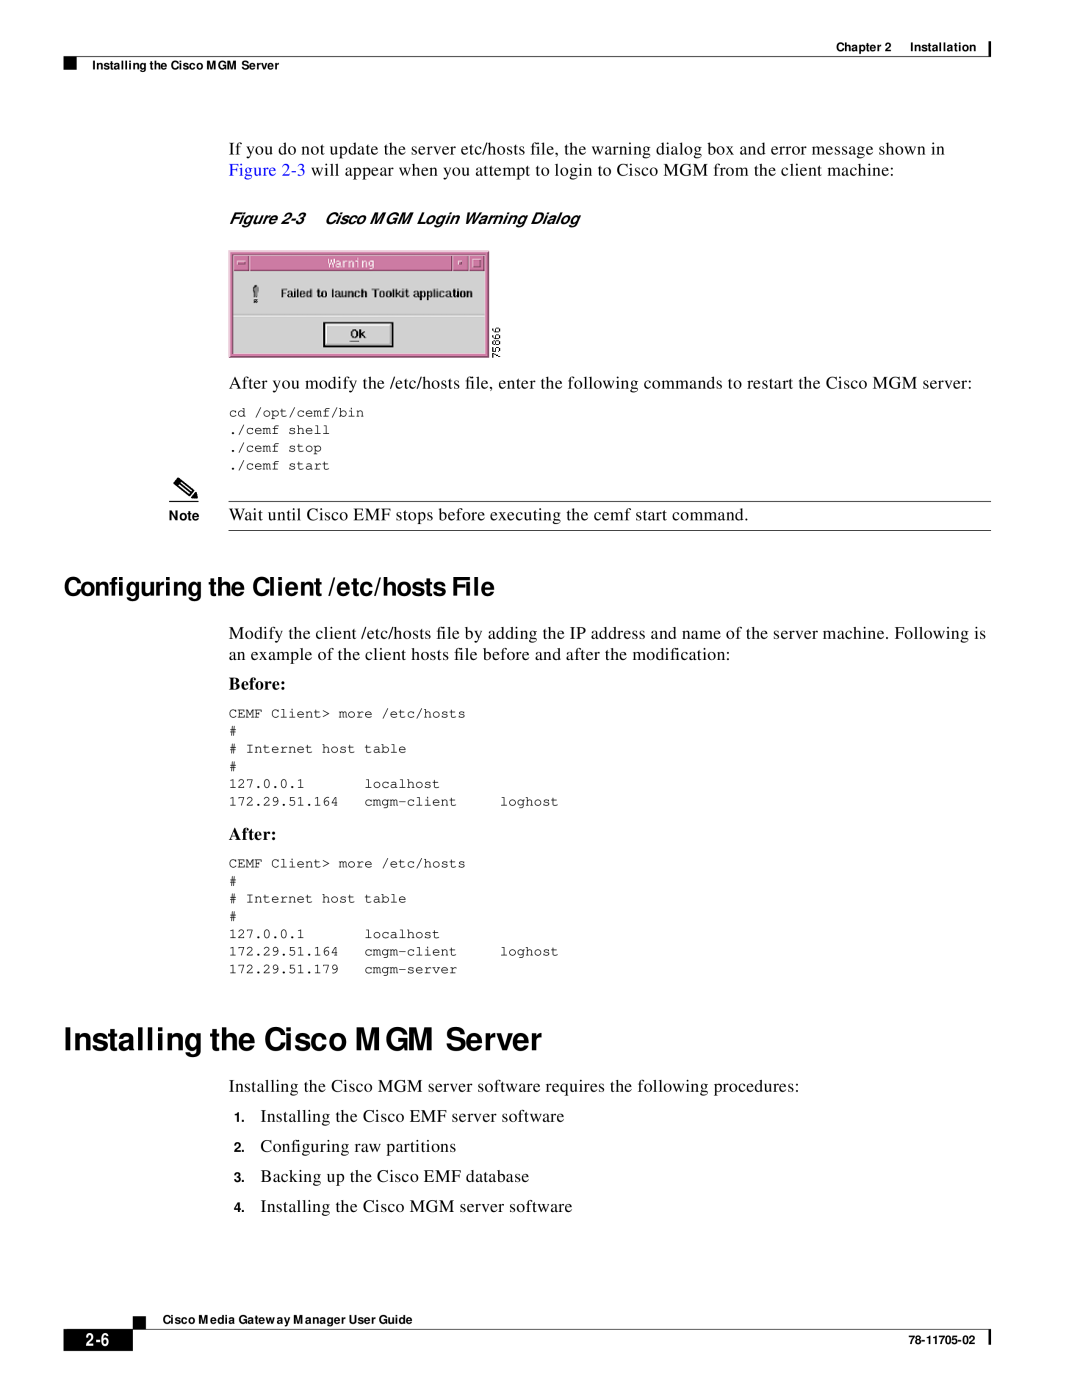 Cisco Systems MGX 8000 manual Installing the Cisco MGM Server, Configuring the Client /etc/hosts File, Before, After 